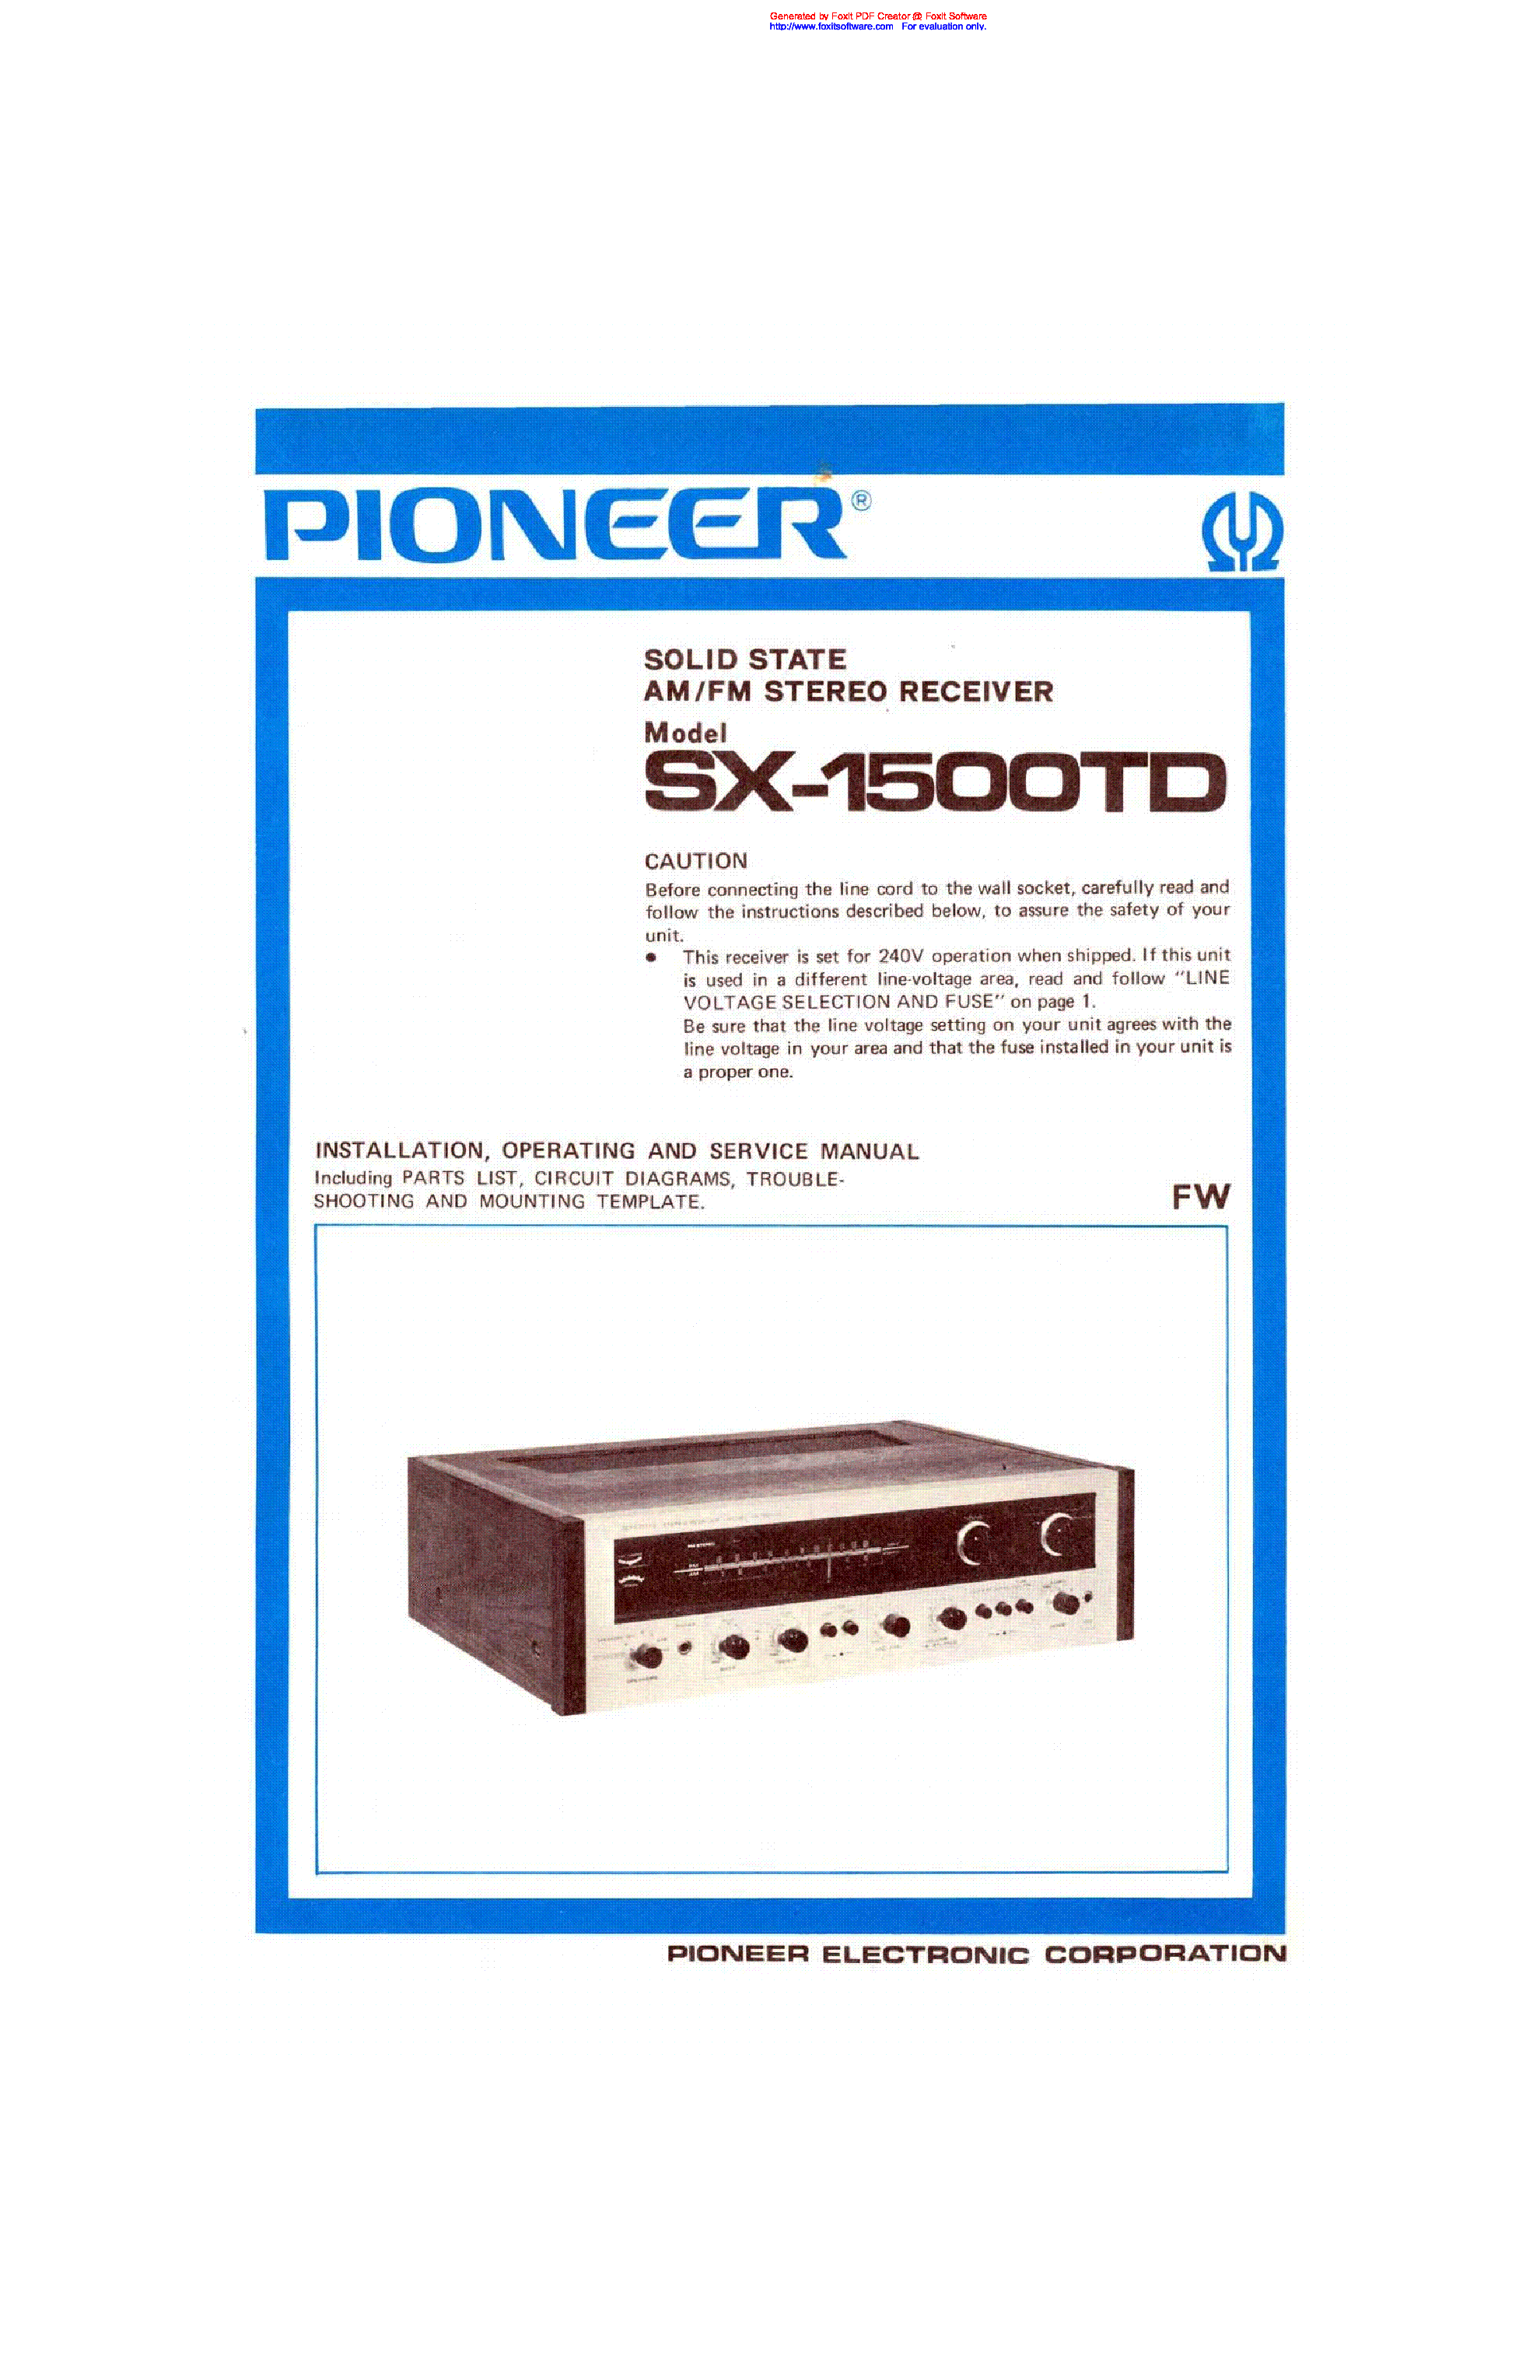 PIONEER SX-1500TD SM service manual (1st page)